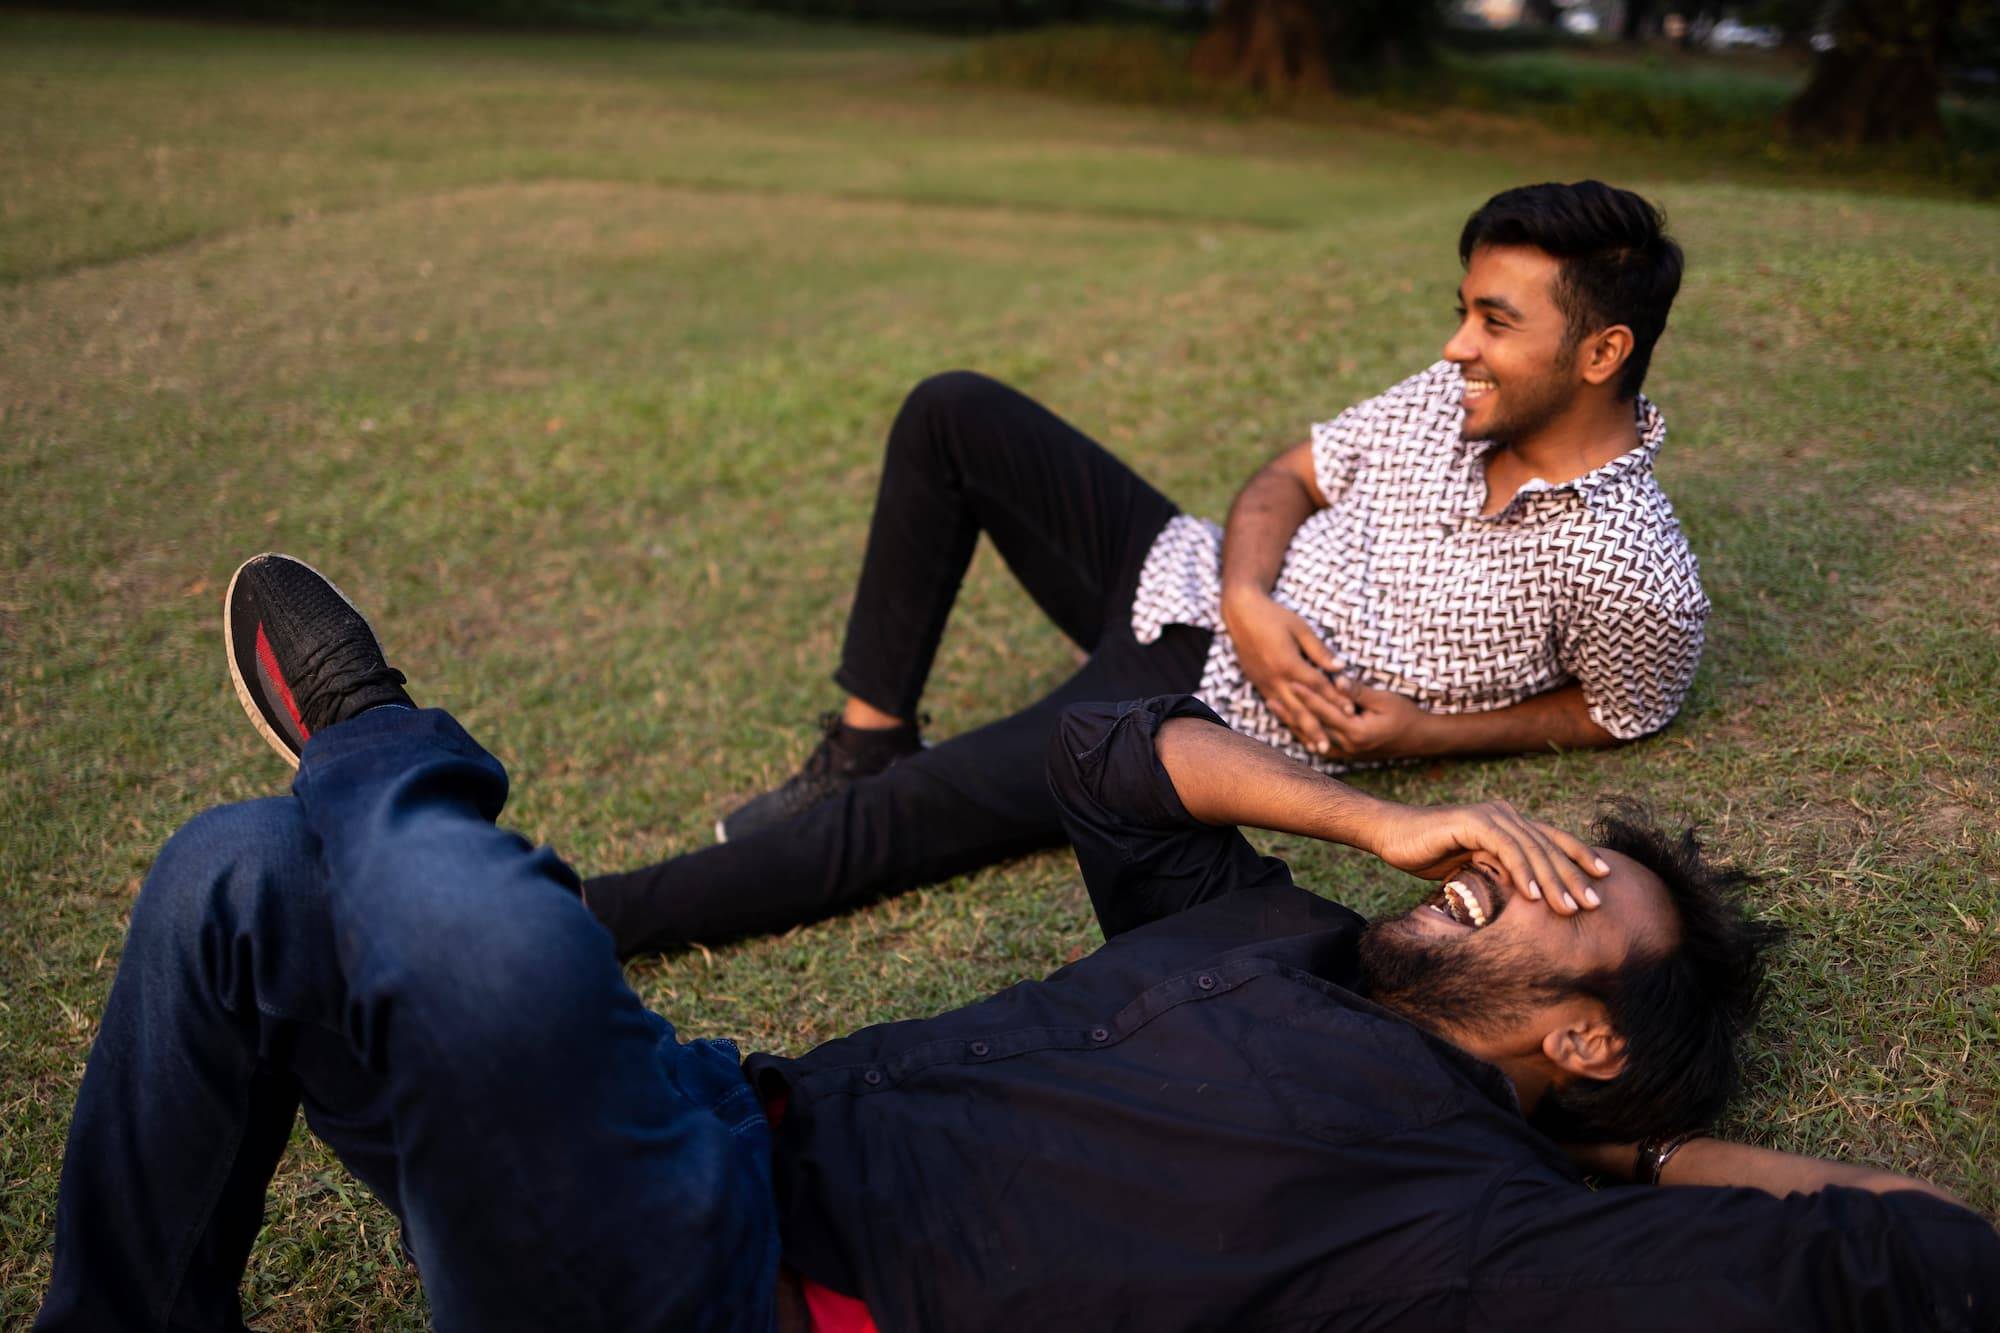 Two Friends Relaxing And Interacting Lying On Grass Ground